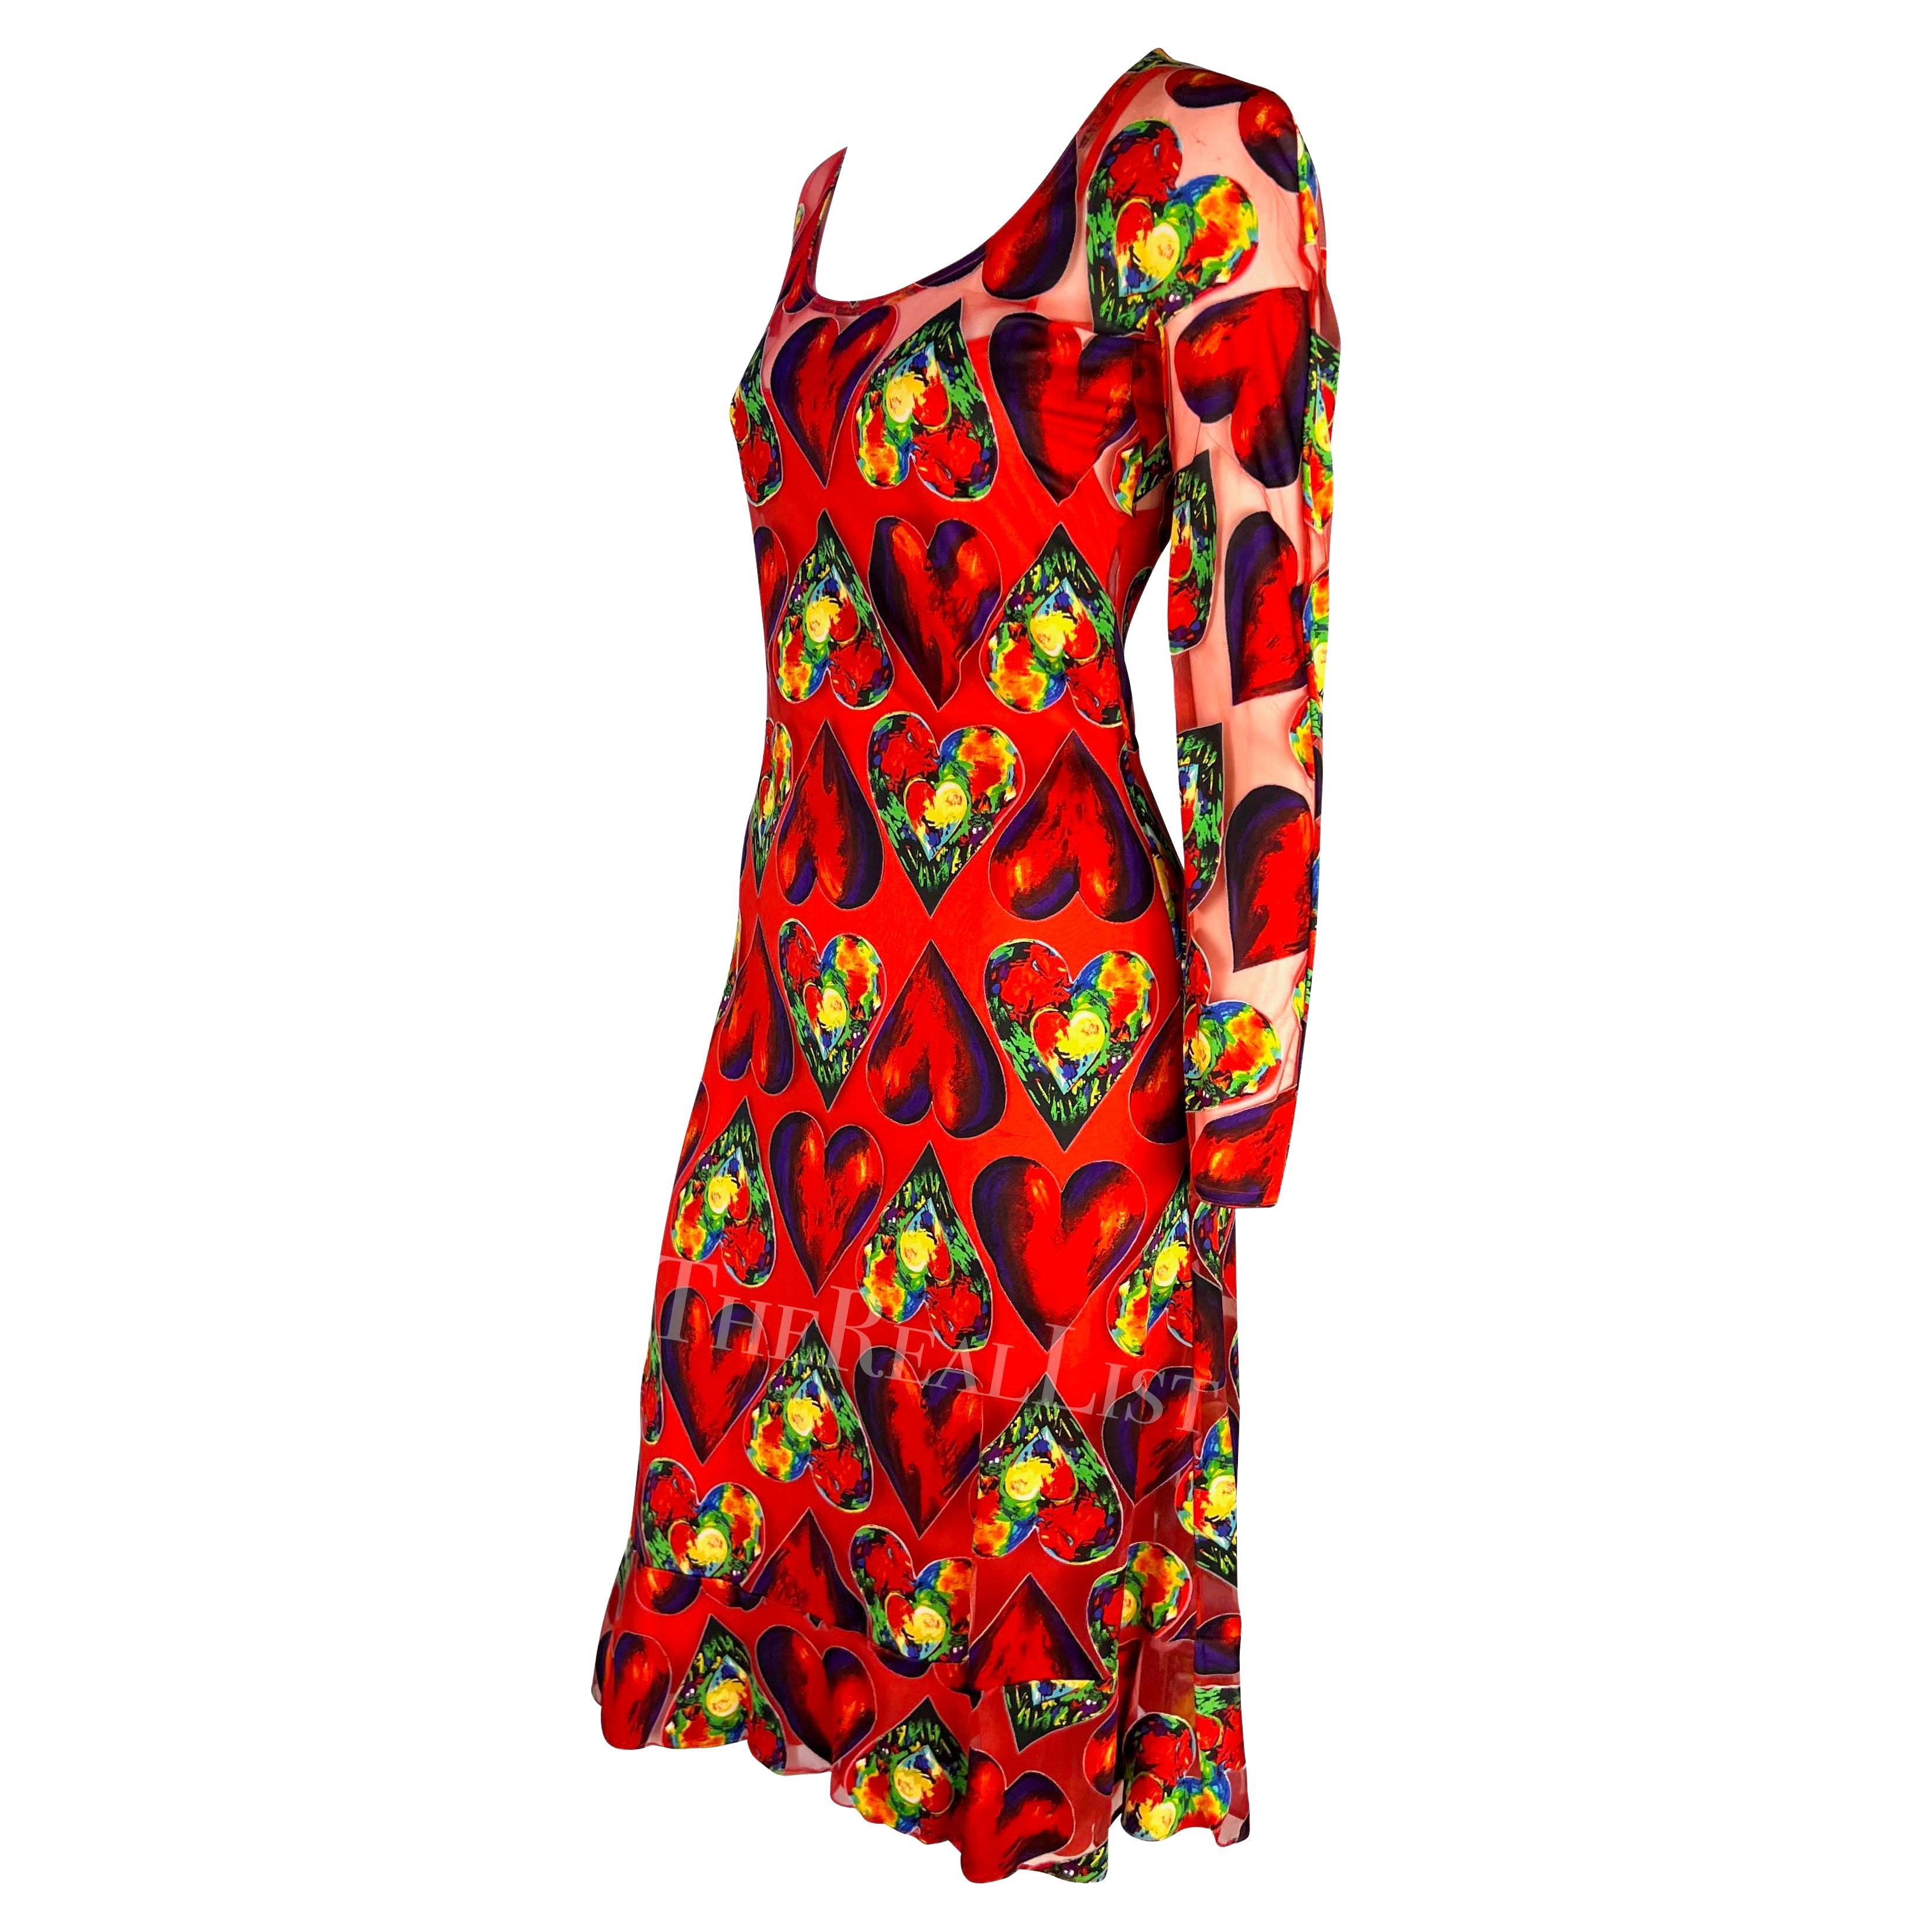 S/S 1997 Gianni Versace Runway Red Sheer Heart Print Bodycon Dress Slip Set In Excellent Condition For Sale In West Hollywood, CA